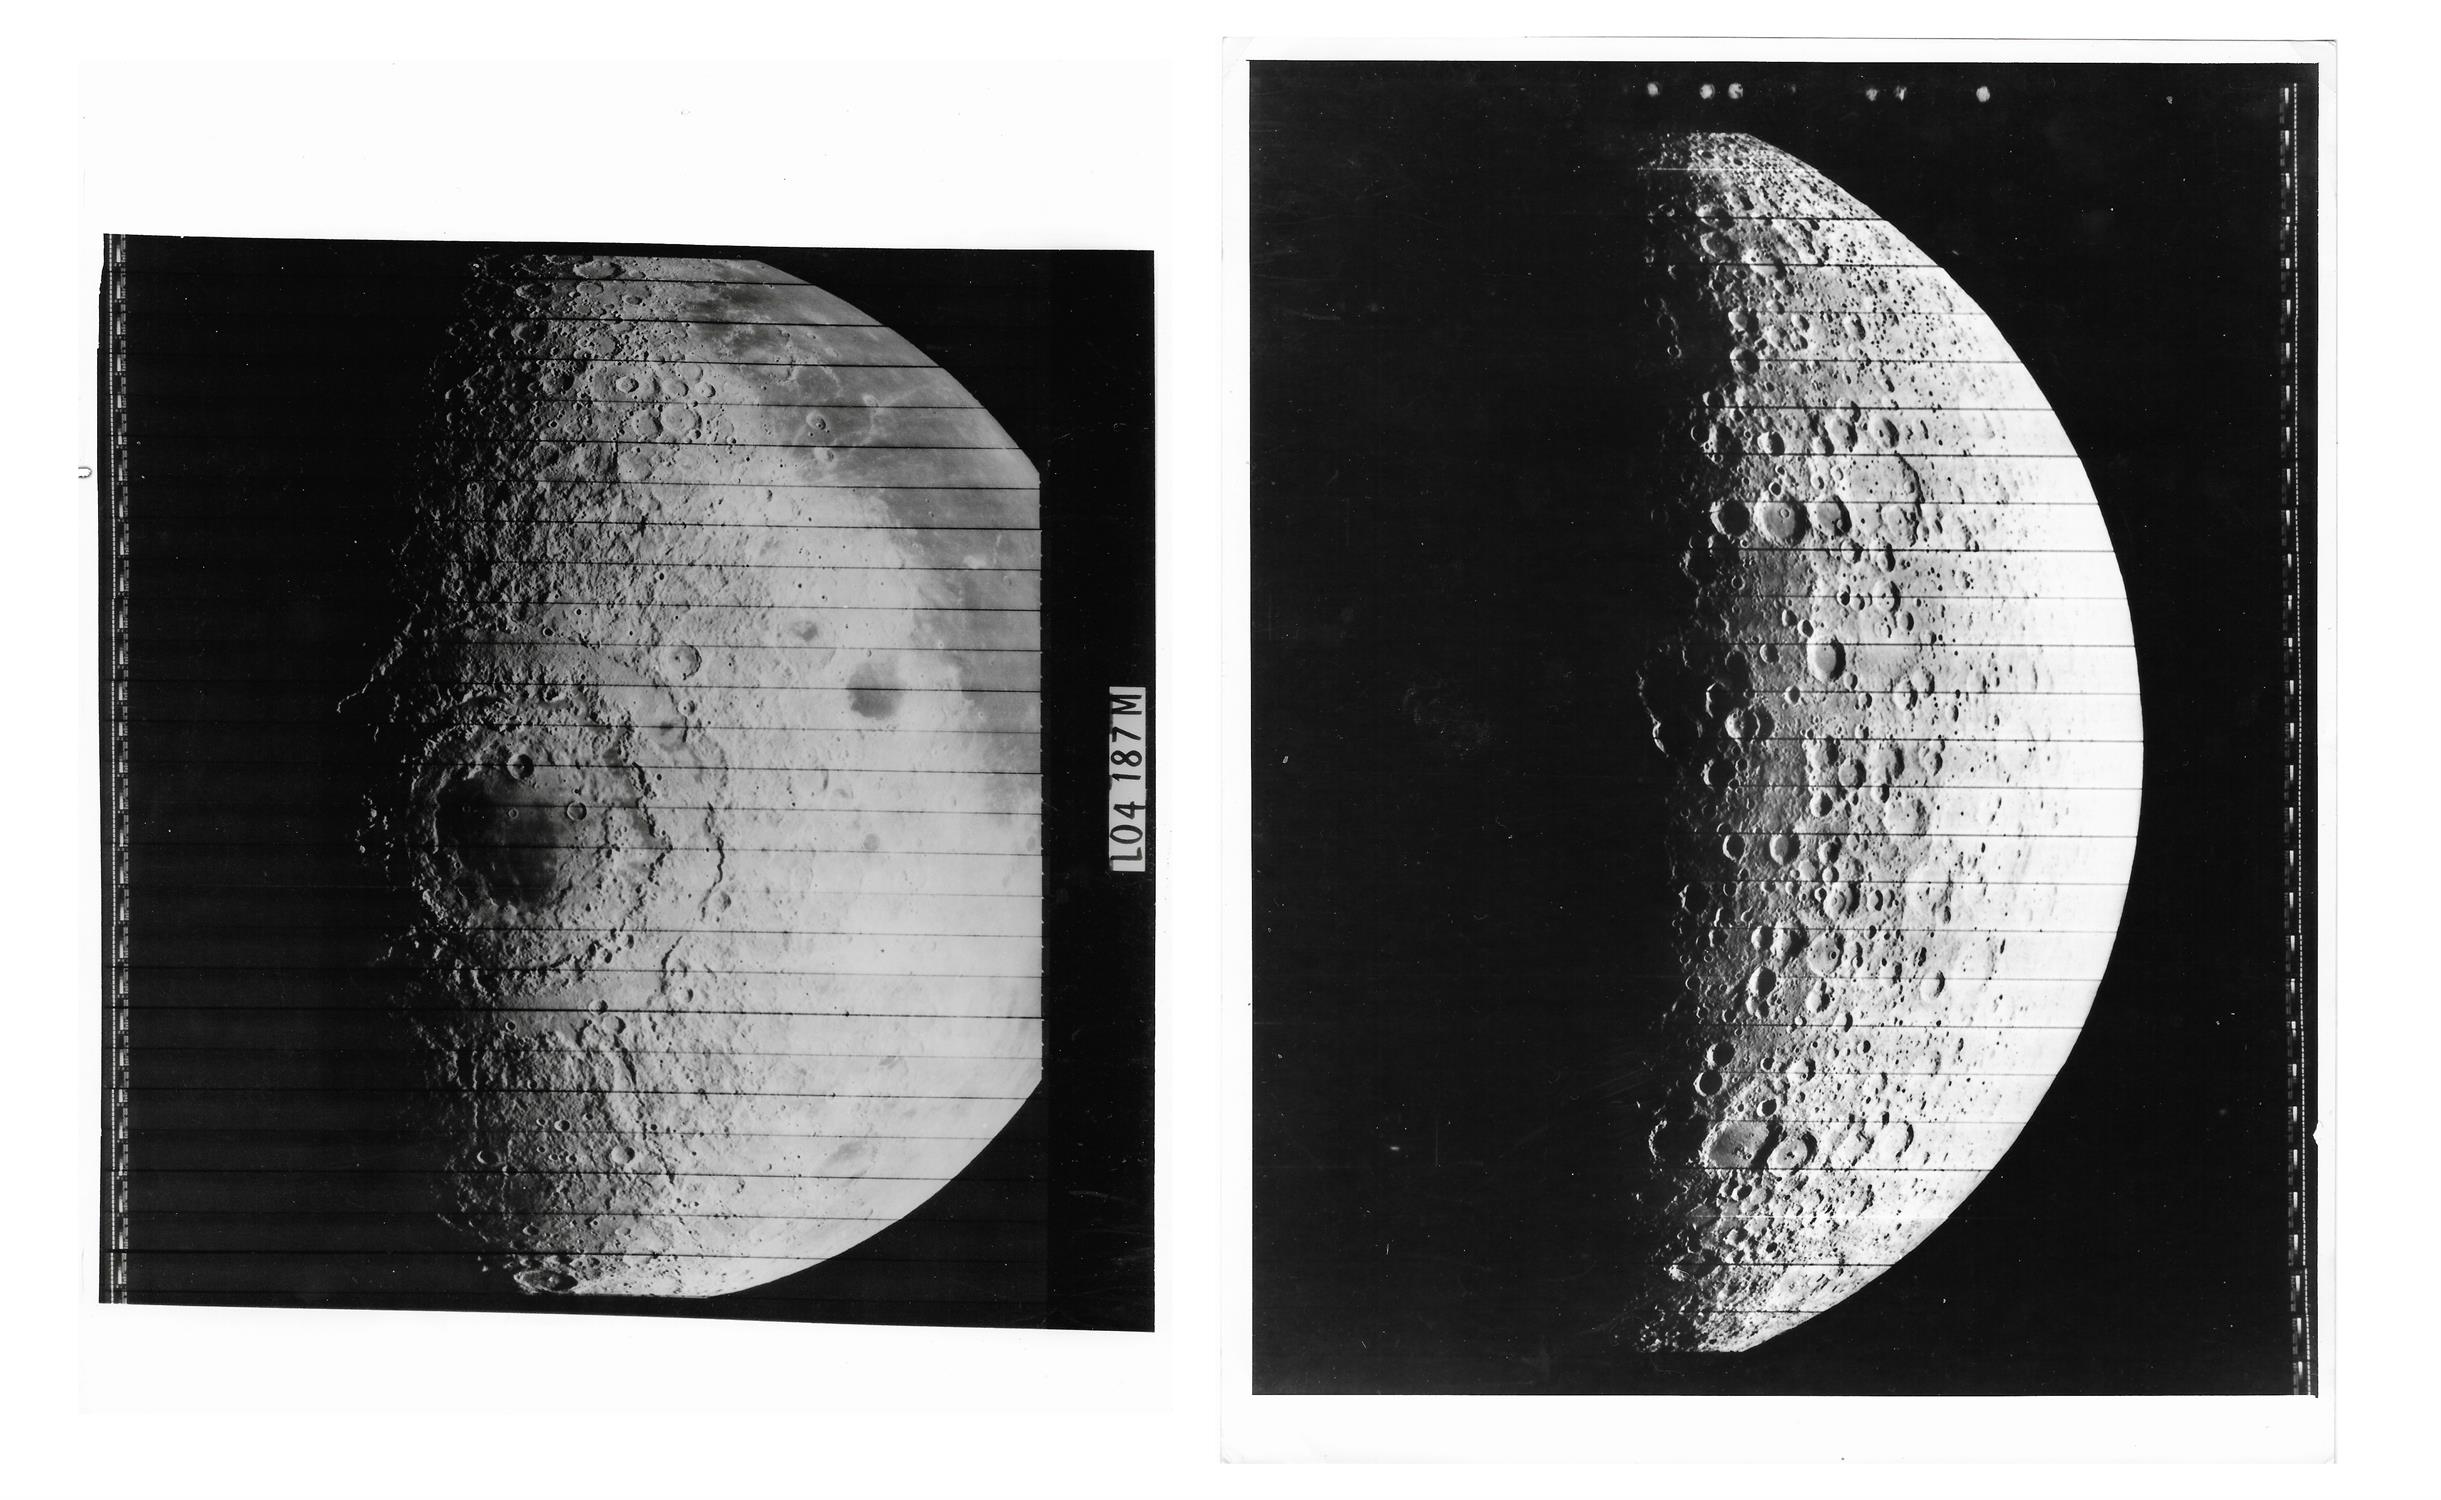 Mare Orientale and the Moon's far side [three views], Lunar Orbiter 4 and 5, May-August 1967